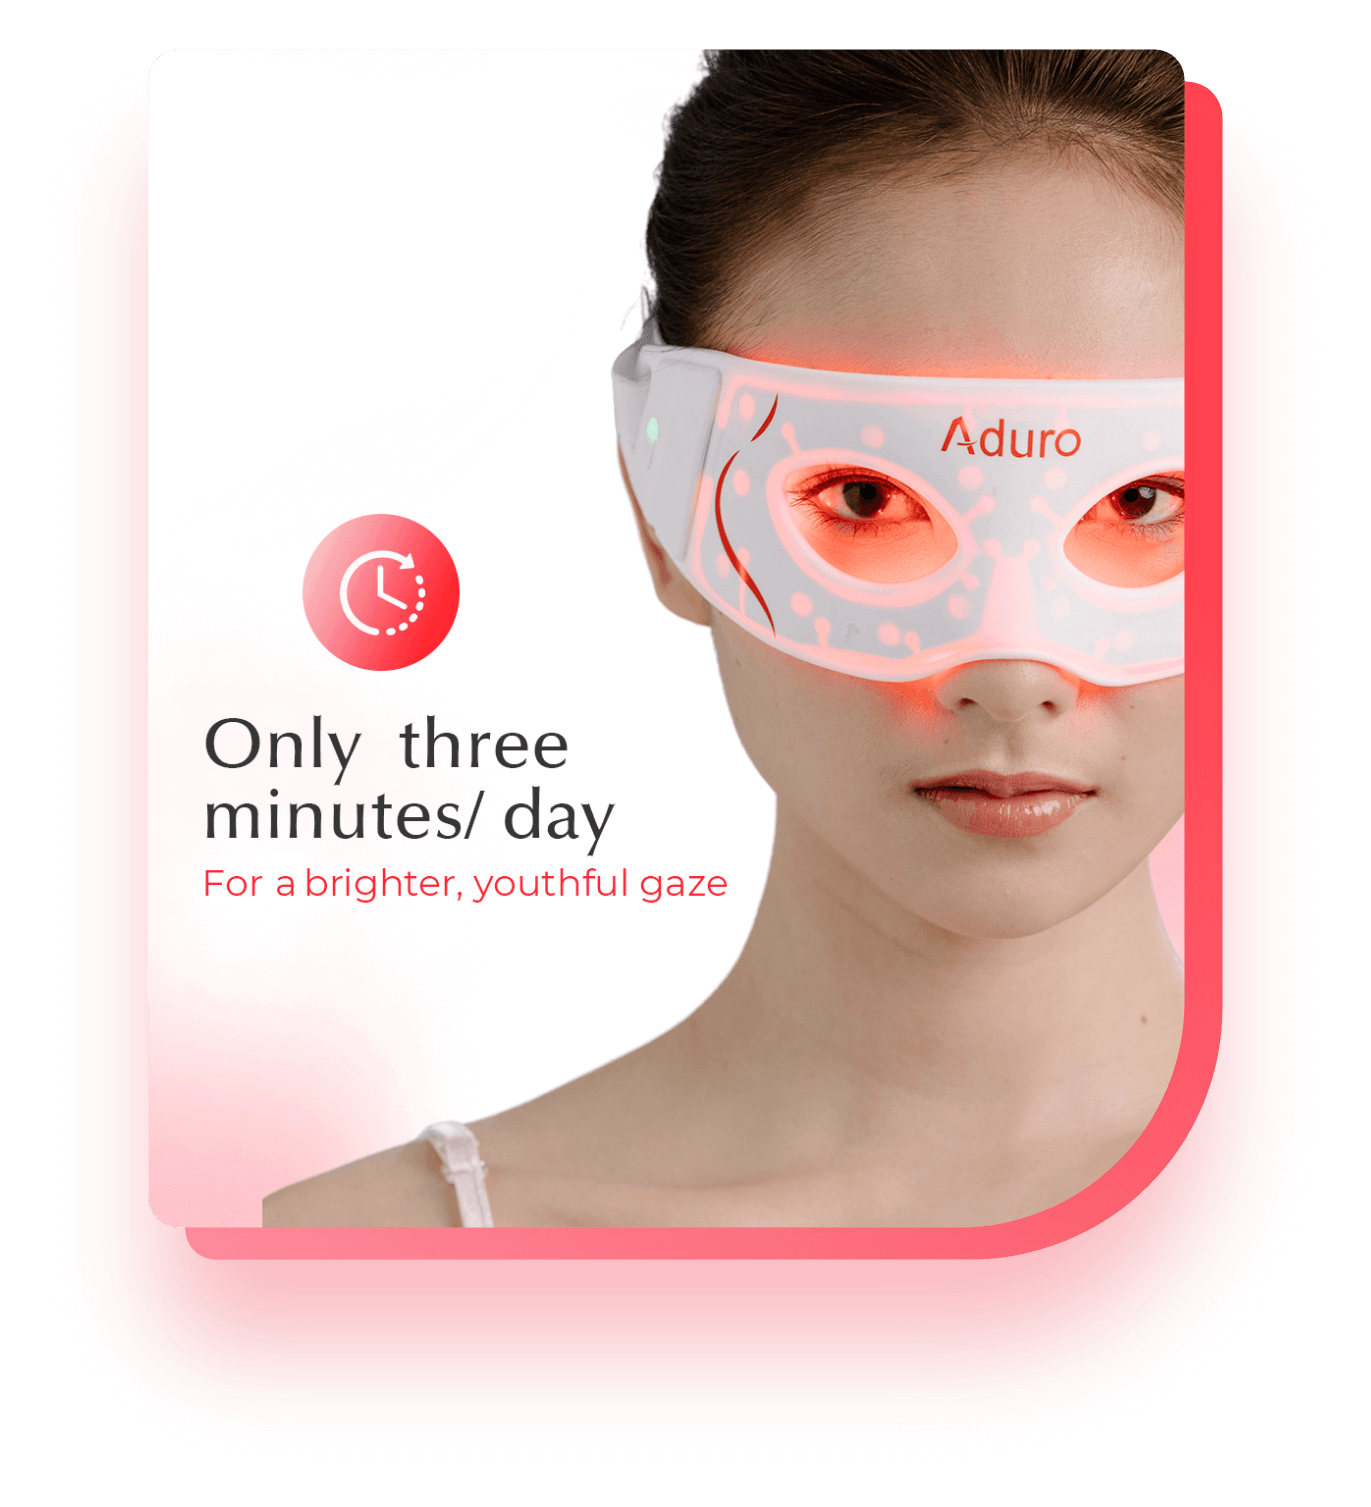 Aduro eye mask for red light therapy 